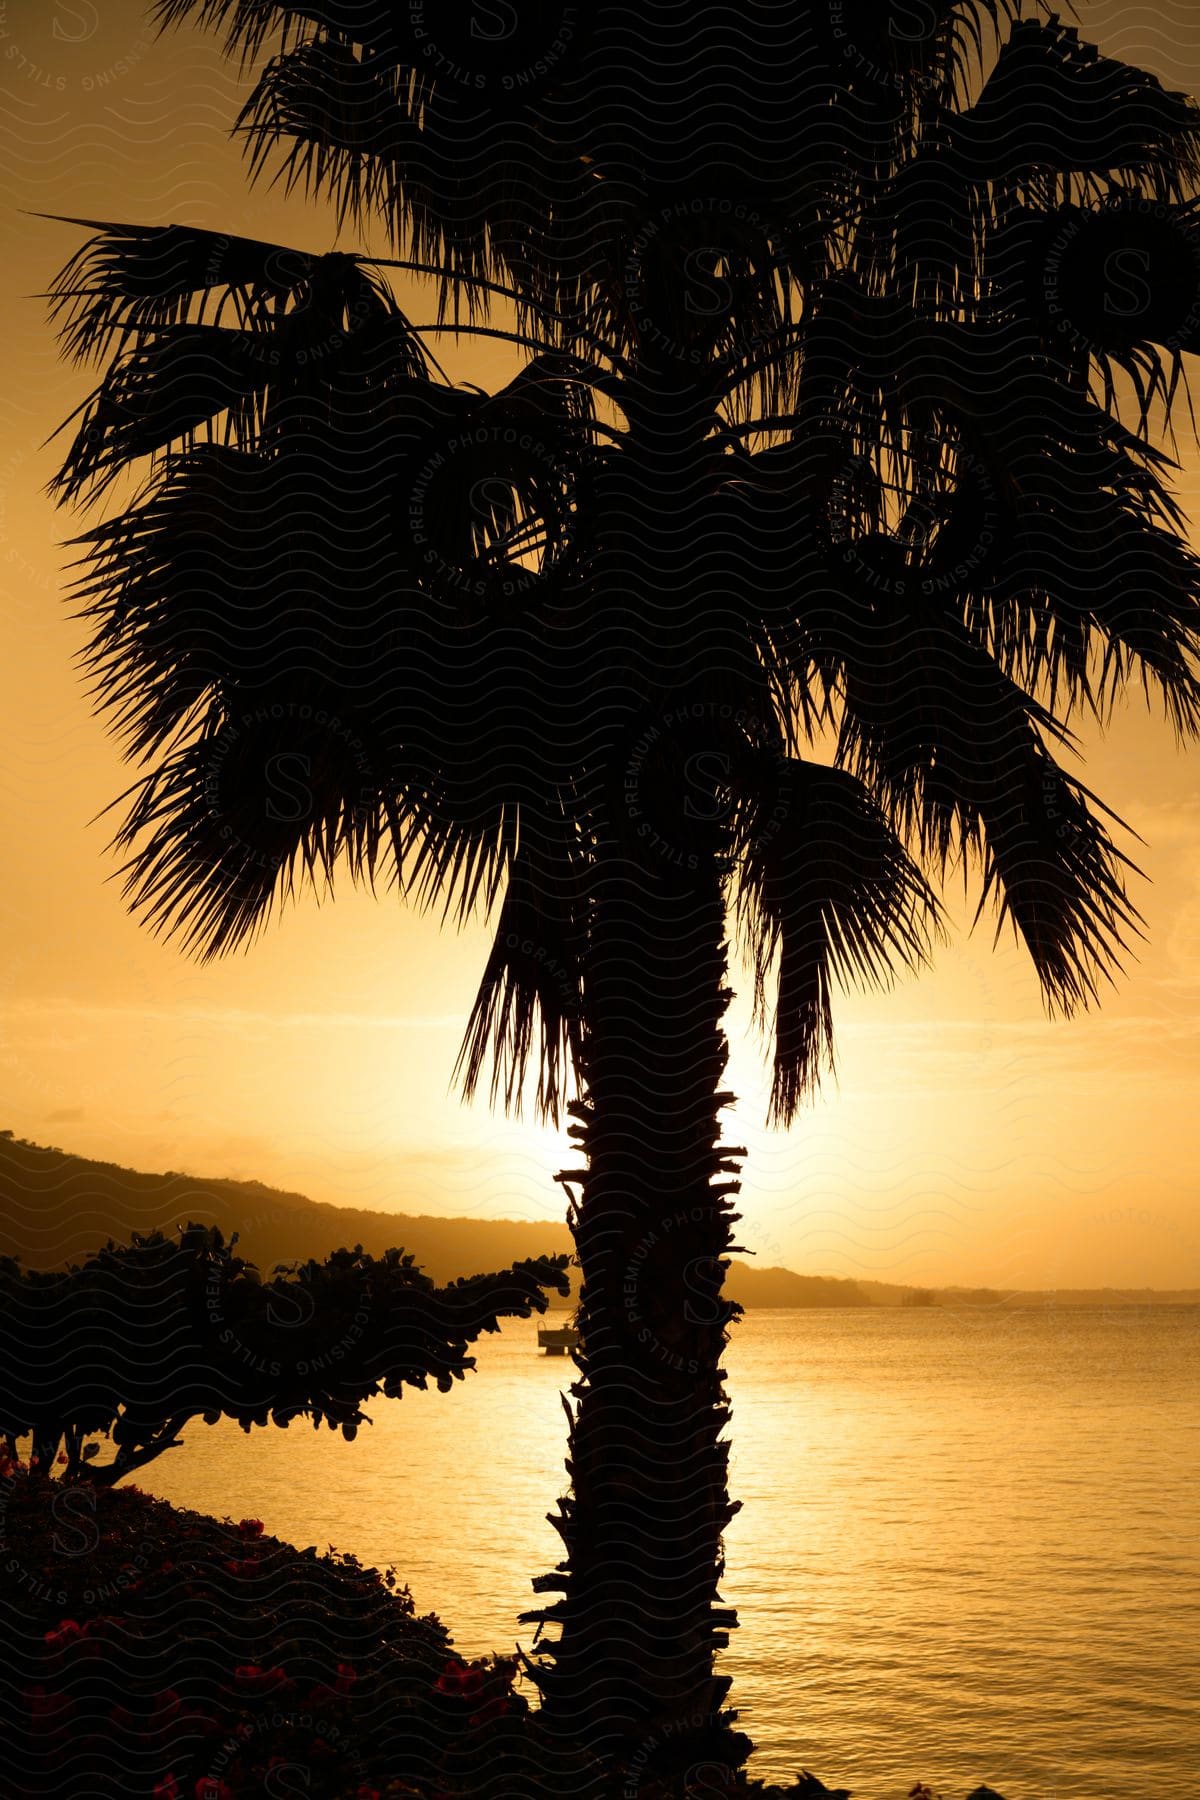 The amber sun is setting behind a palm tree over the water.